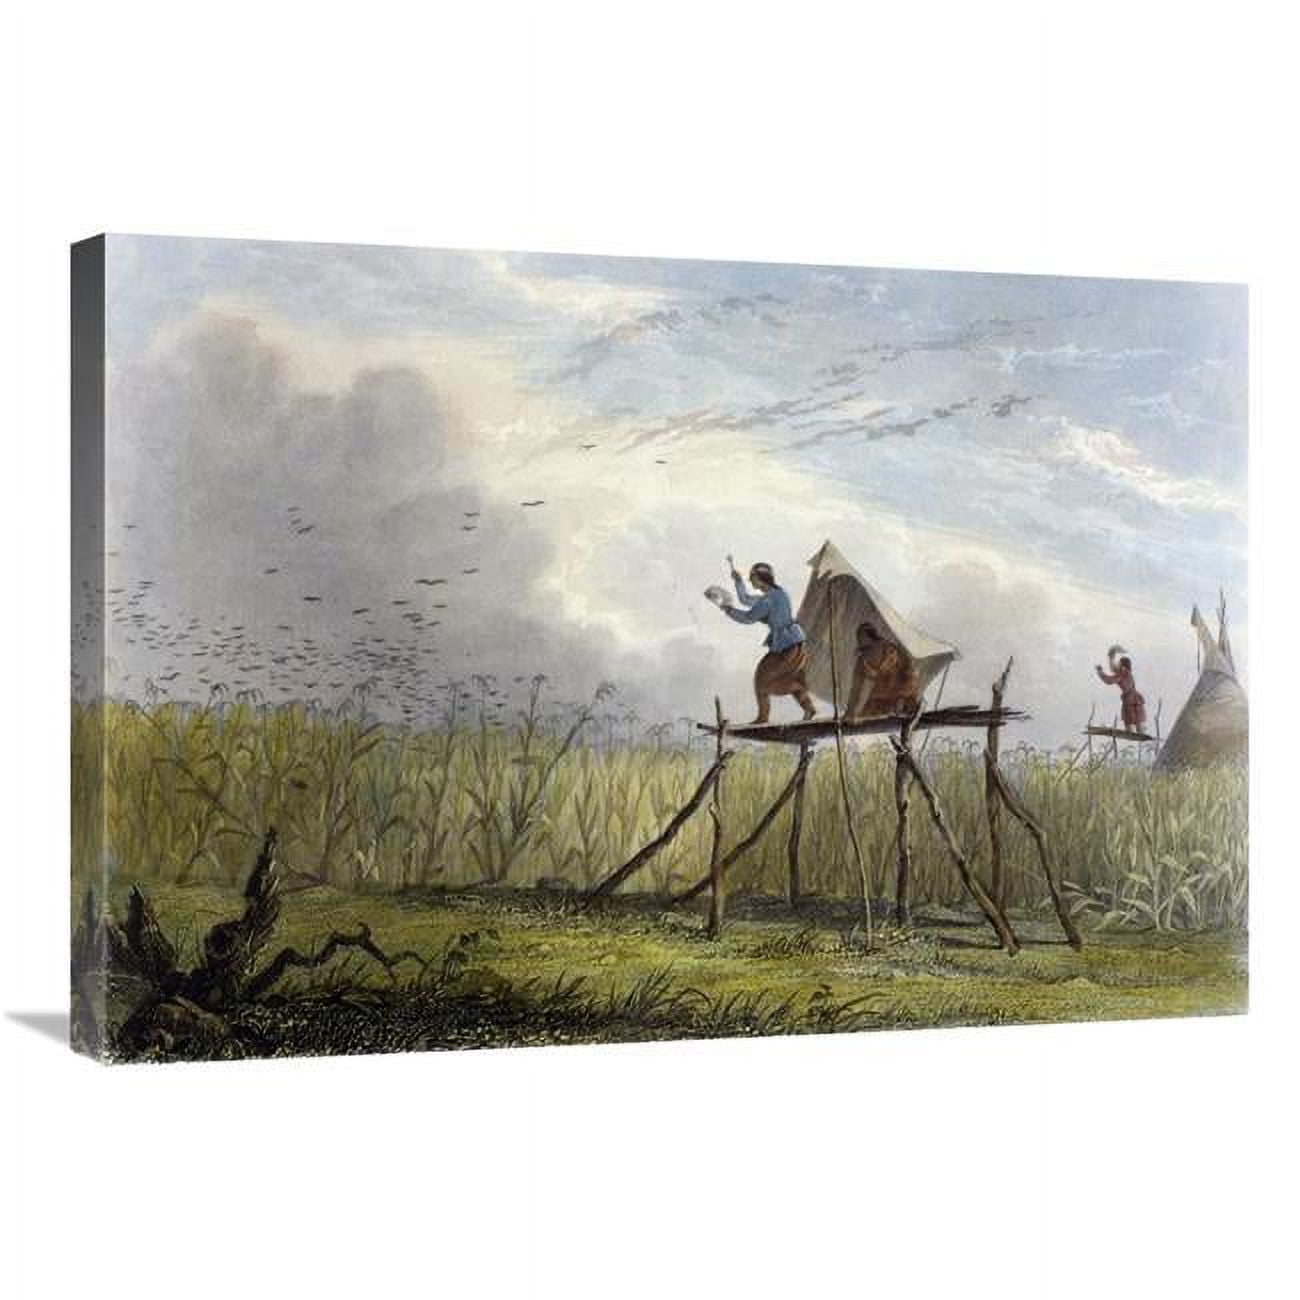 JensenDistributionServices 30 in. Guarding the Corn Fields Art Print - Mary Eastman